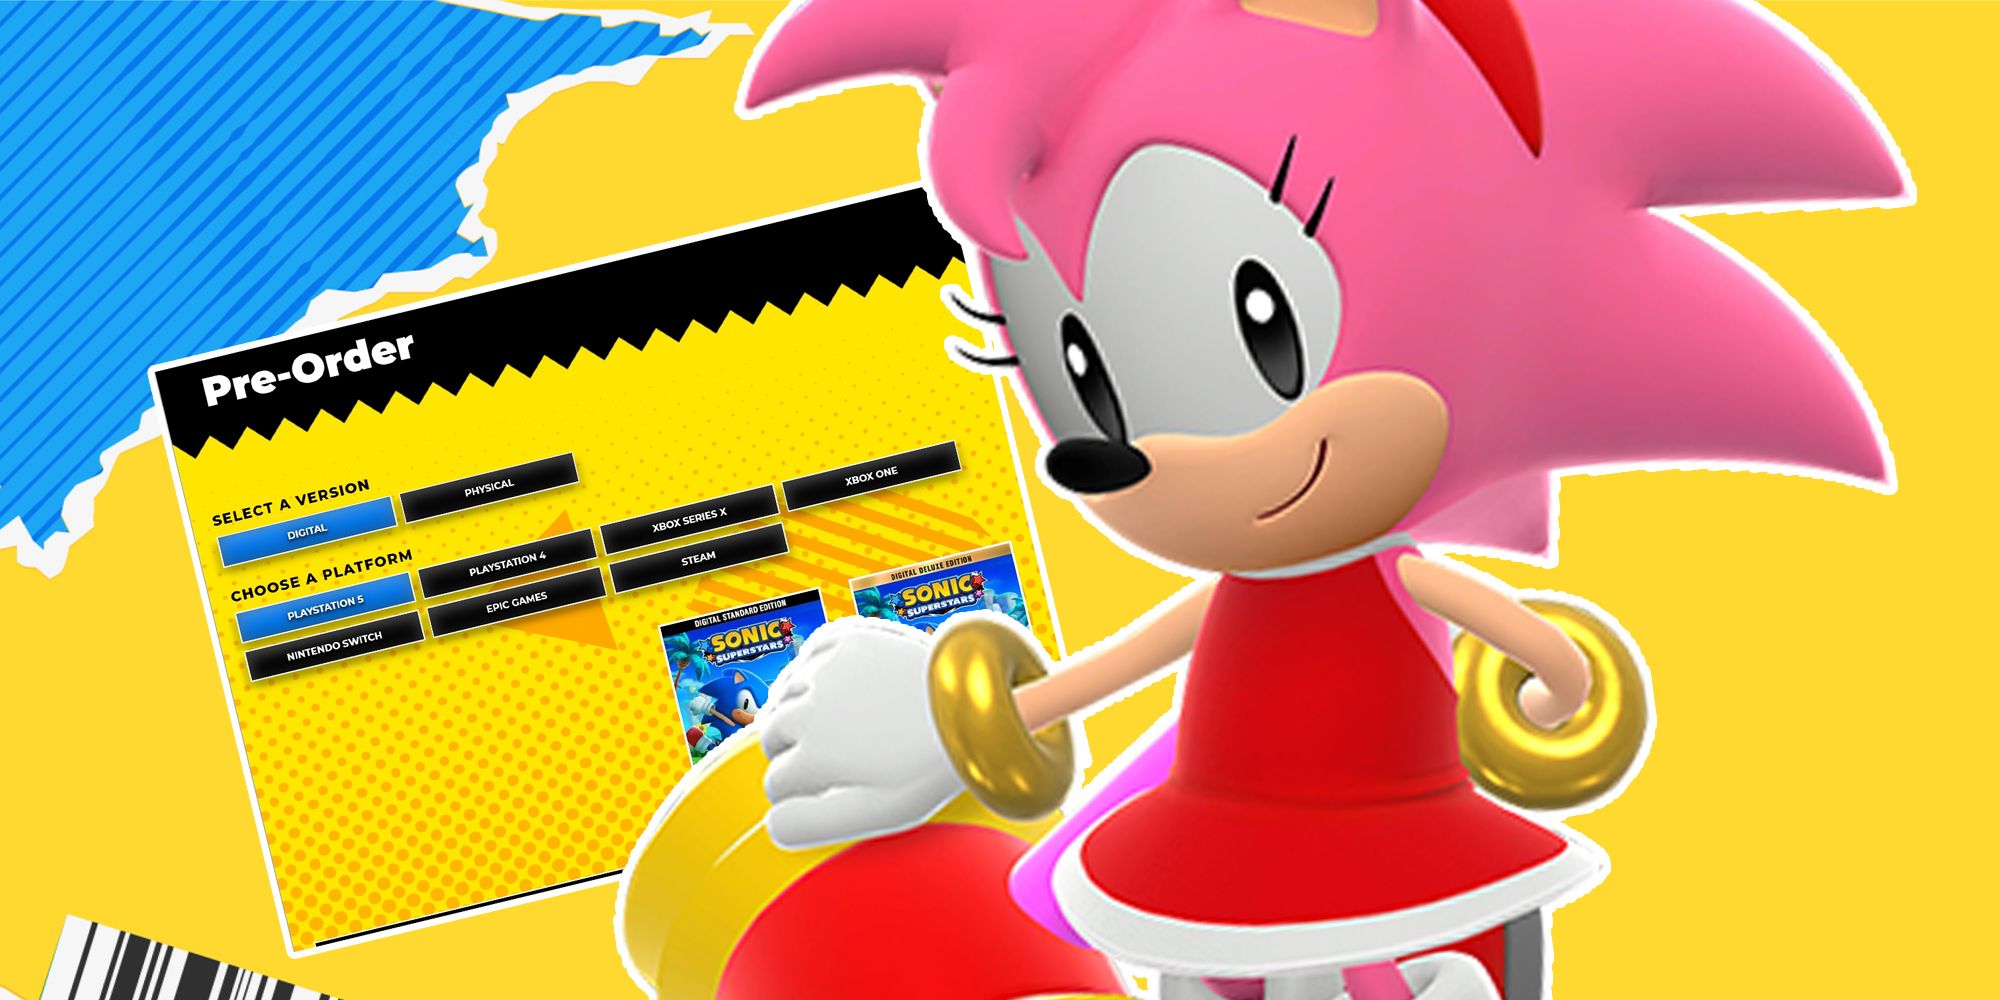 Sonic Superstars Pre-Order Guide: All Editions, Prices, and where to buy in  the US, UK & Australia